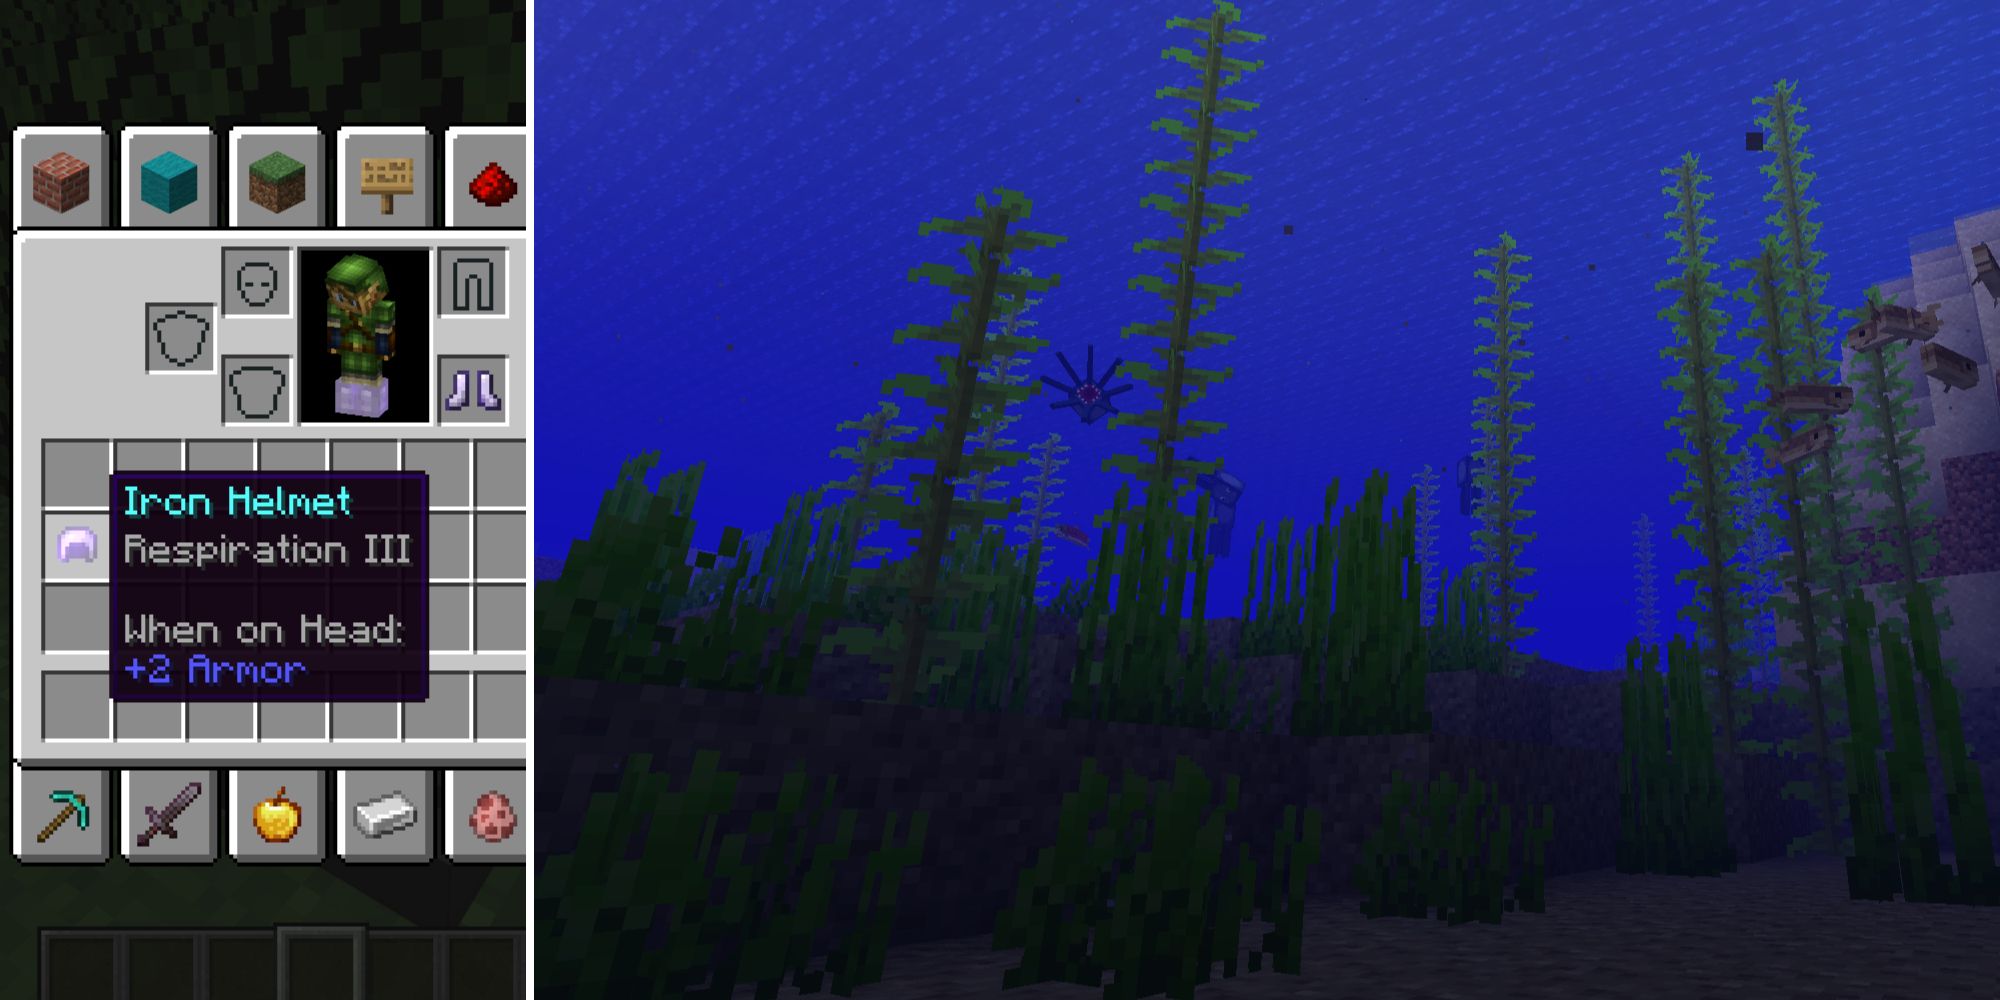 A Helmet of Respiration and the Underwater player in Minecraft